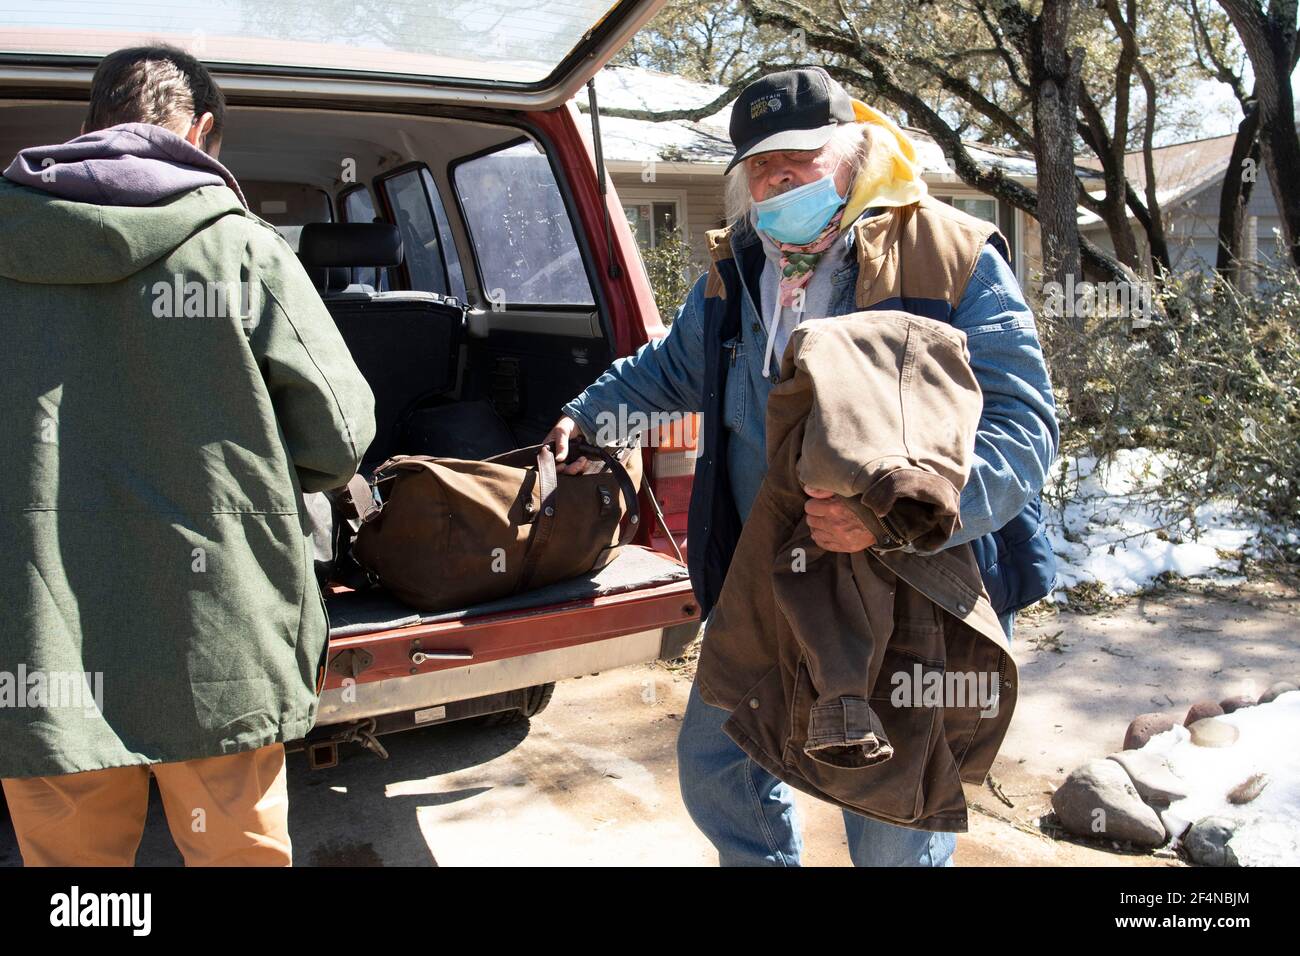 Austin, TX USA Feb 20, 2021: Homeless veterans arrive for their first night at a privately-run sober house after spending a week at a church-run warming shelter during Austin's recent severe winter weather. Church members arranged for the new accommodations after both men requested help for their alcoholism. Stock Photo